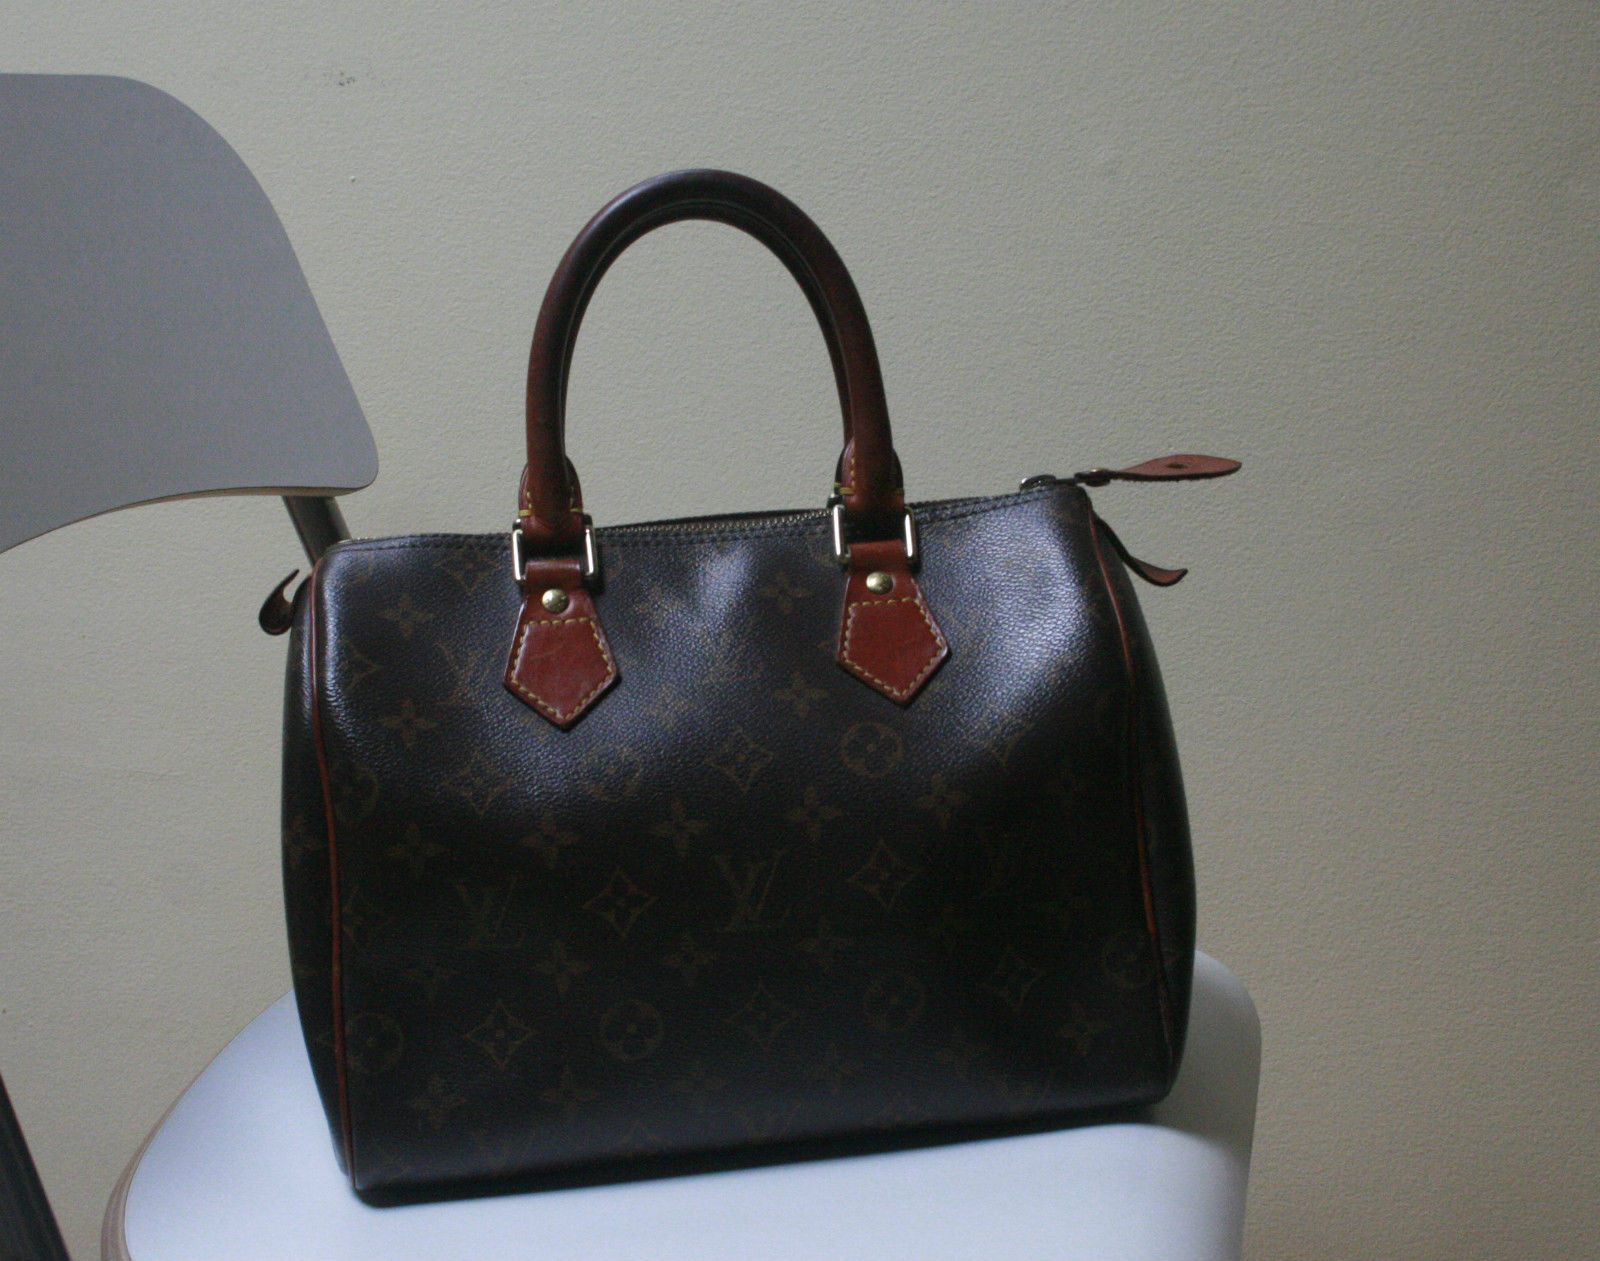 Scored a Louis Vuitton bag at Value Village today!! (unsure if real yet,  but excited nonetheless) : r/ThriftStoreHauls